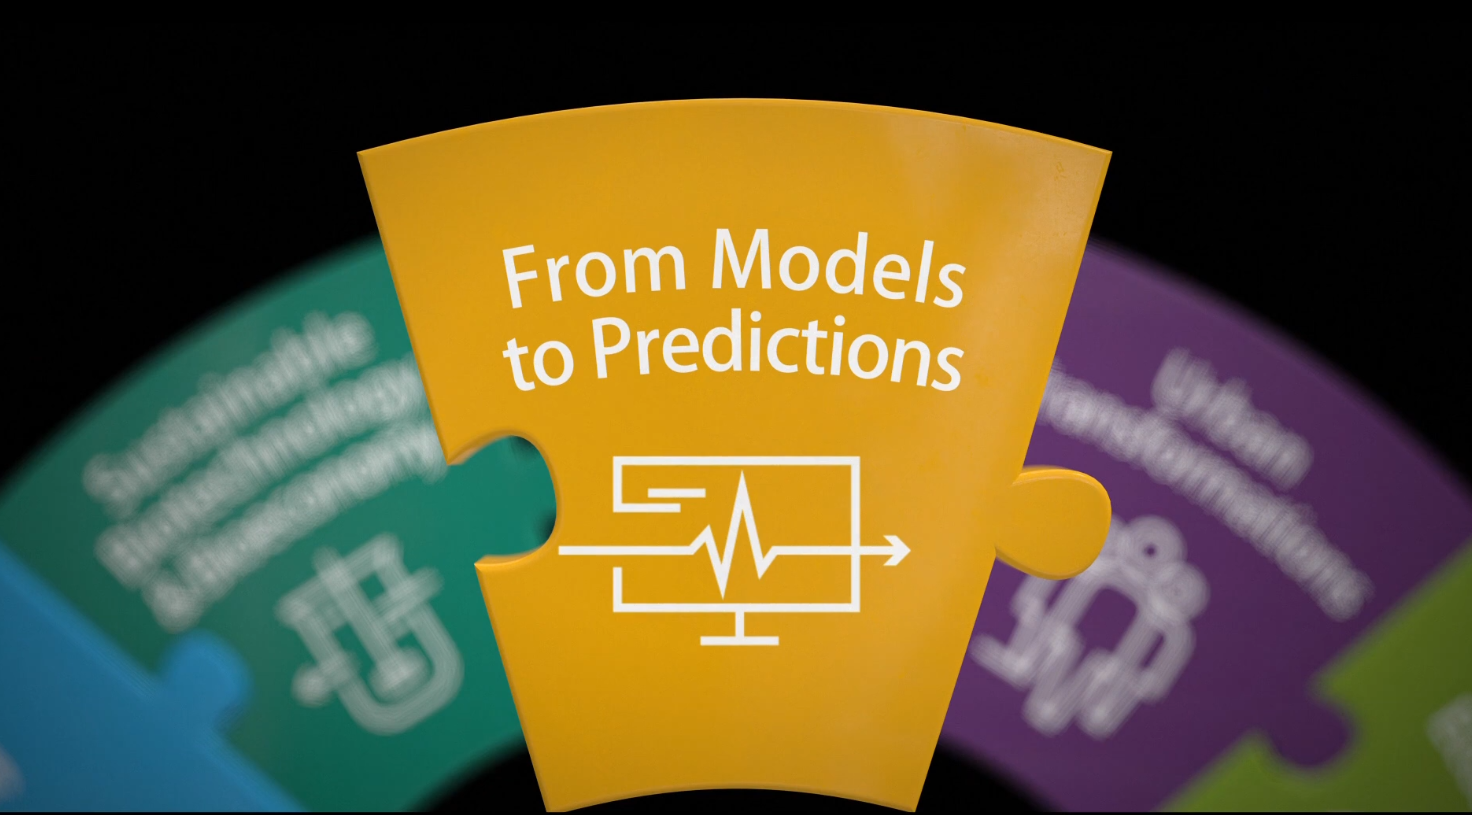 From Models to Prediction. Source: UFZ / youtube